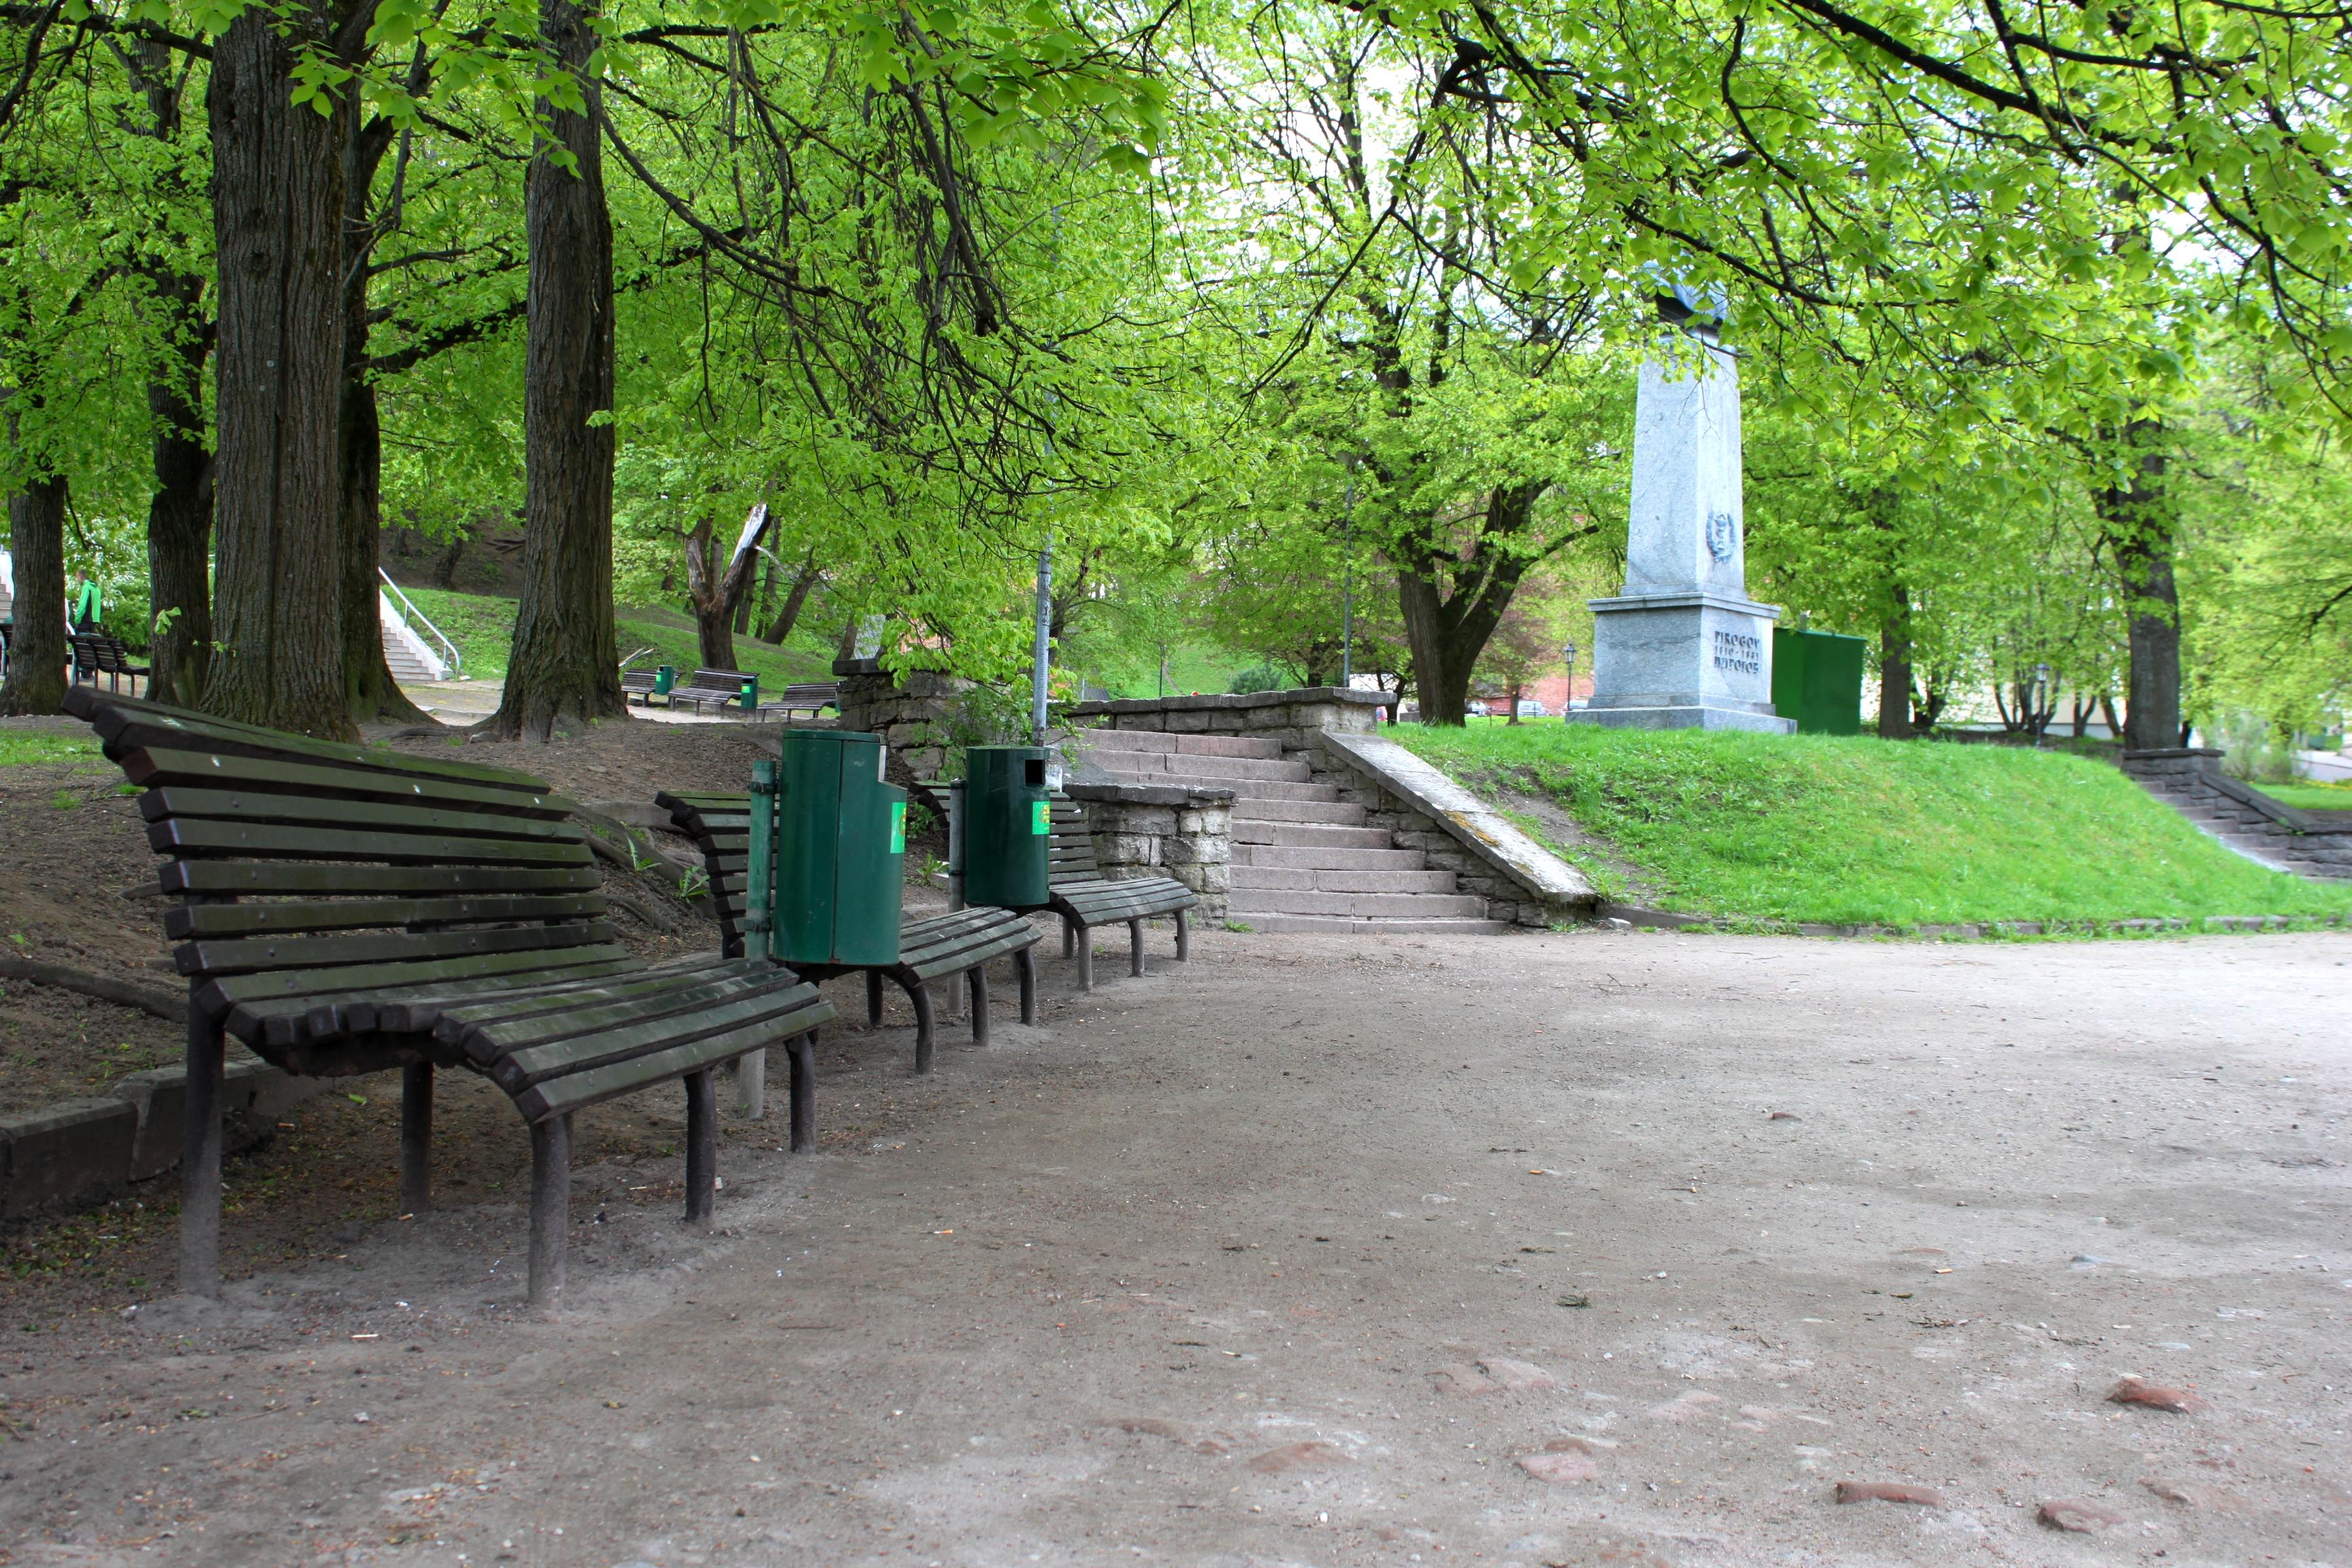 Cover image of this place Pirogov Park